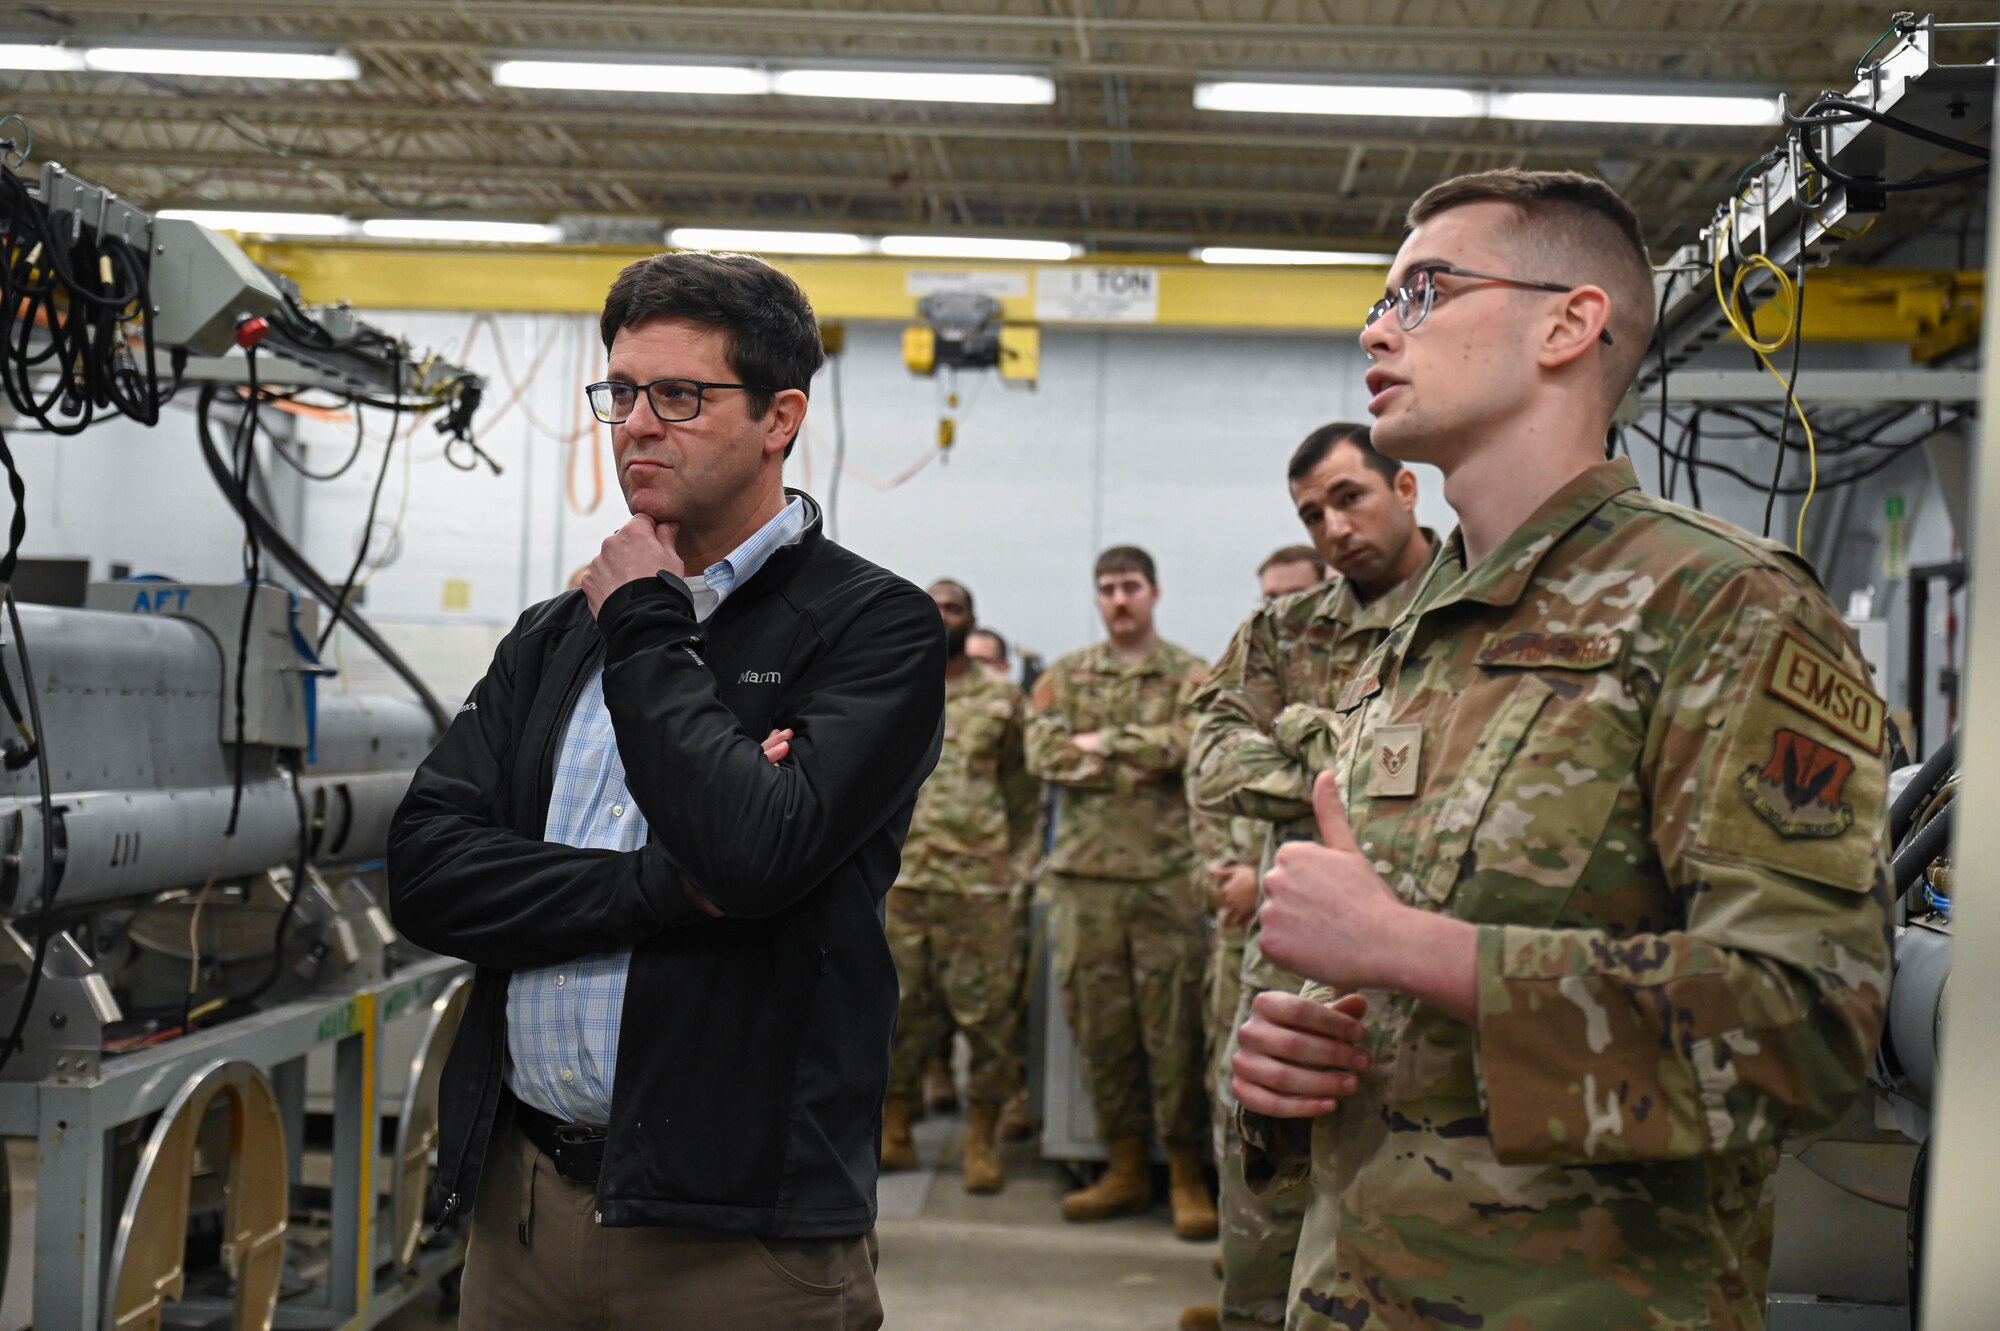 Dr. John Plumb, Assistant Secretary of Defense for Space Policy, receives a brief from U.S. Air Force Staff Sgt. Matthew Berg, 36th Electronic Warfare Squadron EW systems journeyman, during a tour of the 350th Spectrum Warfare Wing at Eglin Air Force Base, Fla., March 11, 2024. The pods are used in testing mission data files that allow aircraft to sense, identify, locate, and counter electronic warfare threats. (U.S. Air Force photo by Capt. Benjamin Aronson)